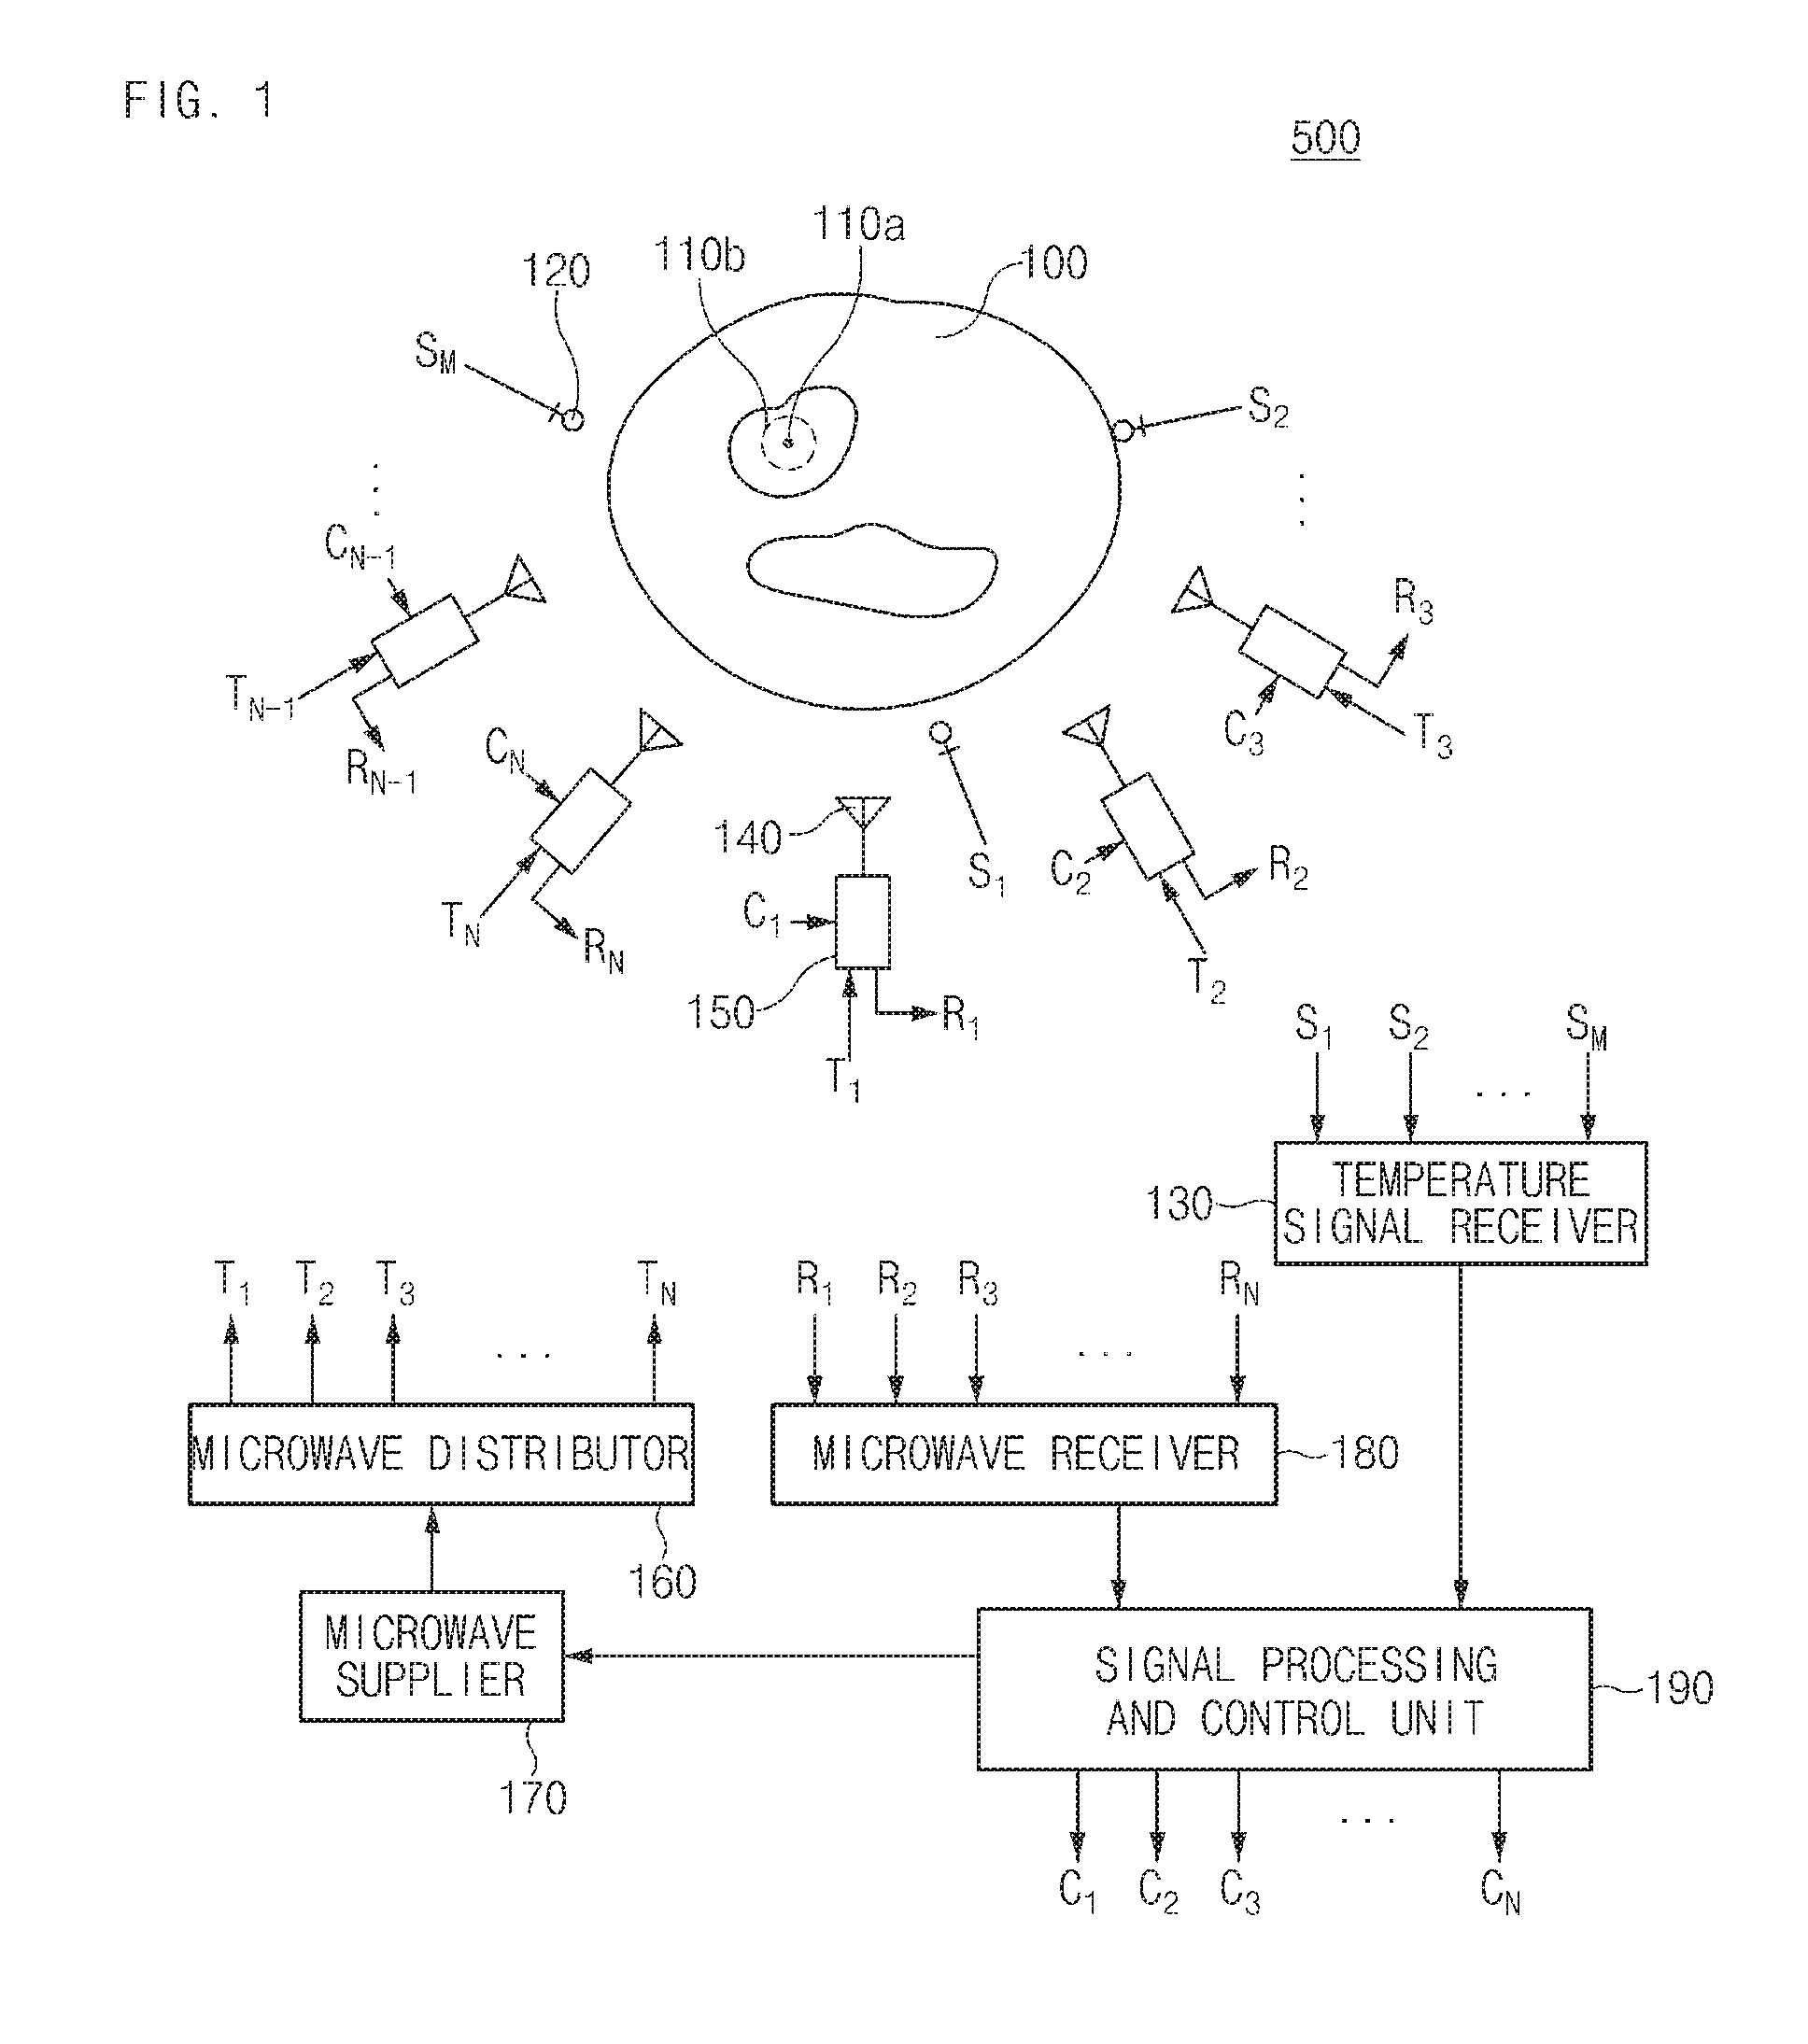 Method and apparatus for focusing microwave and thermally imaging for biological tissue